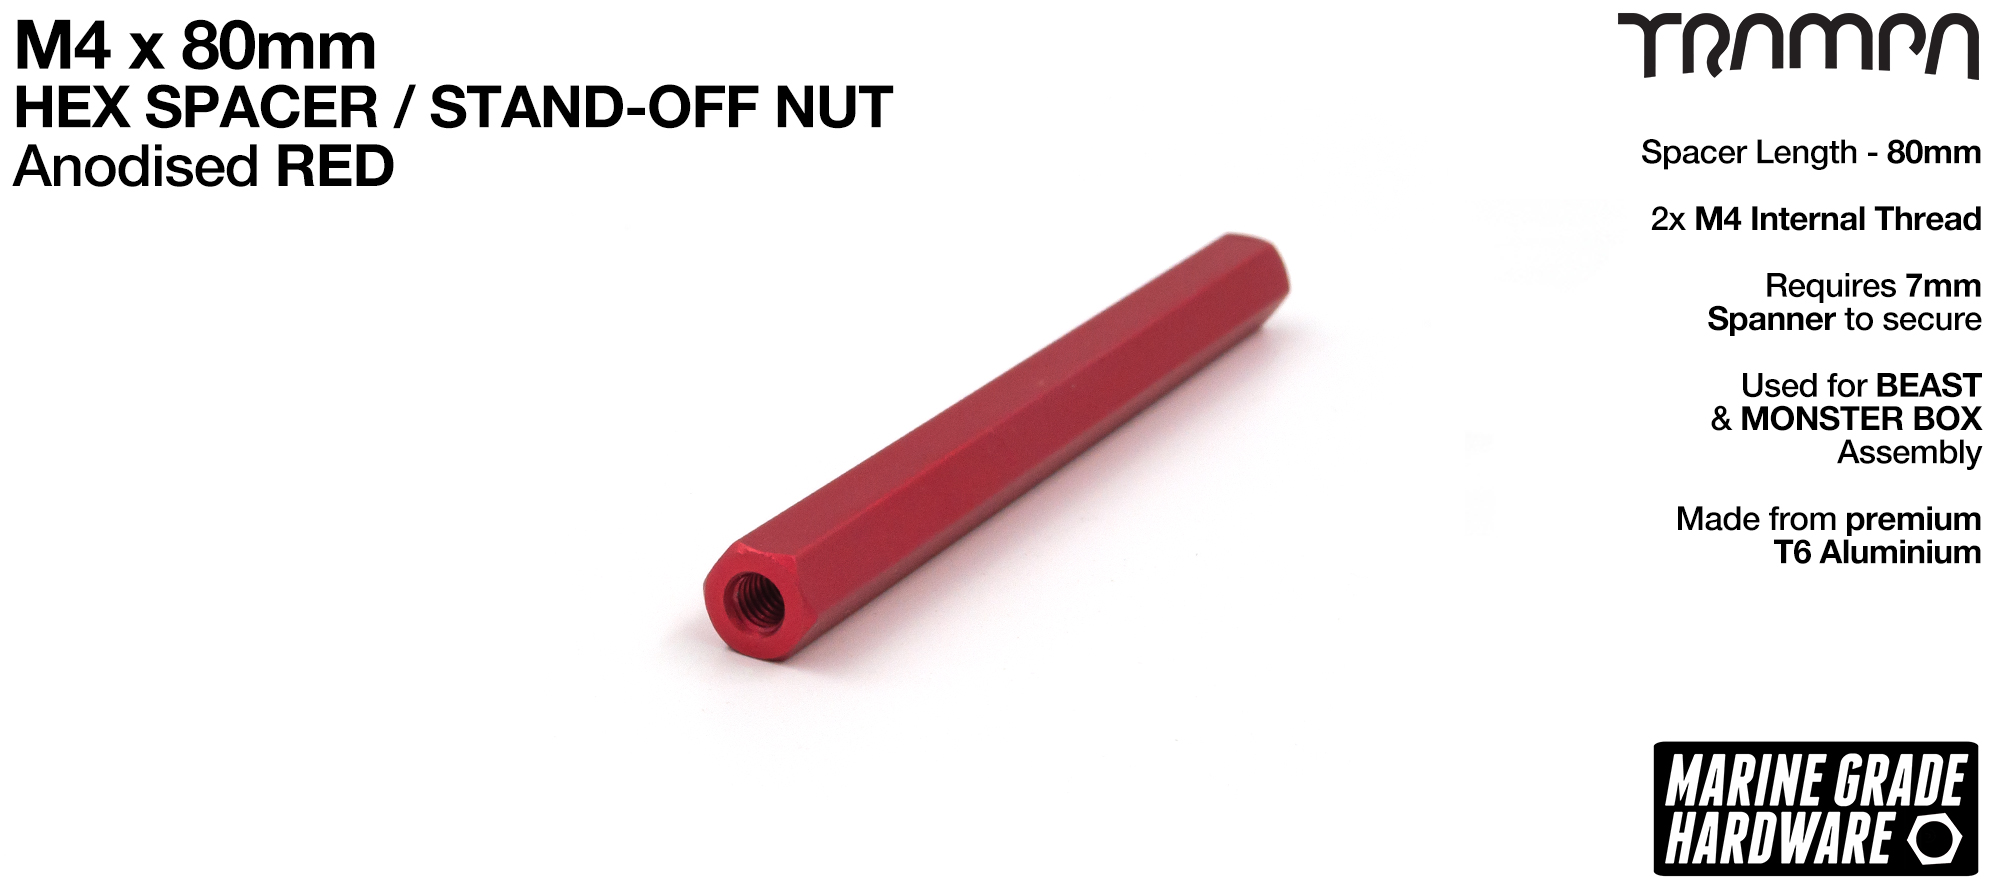 M4 x 80mm Aluminium Threaded Spacer Nut Used for assembling the BEAST Battery Boxes - RED